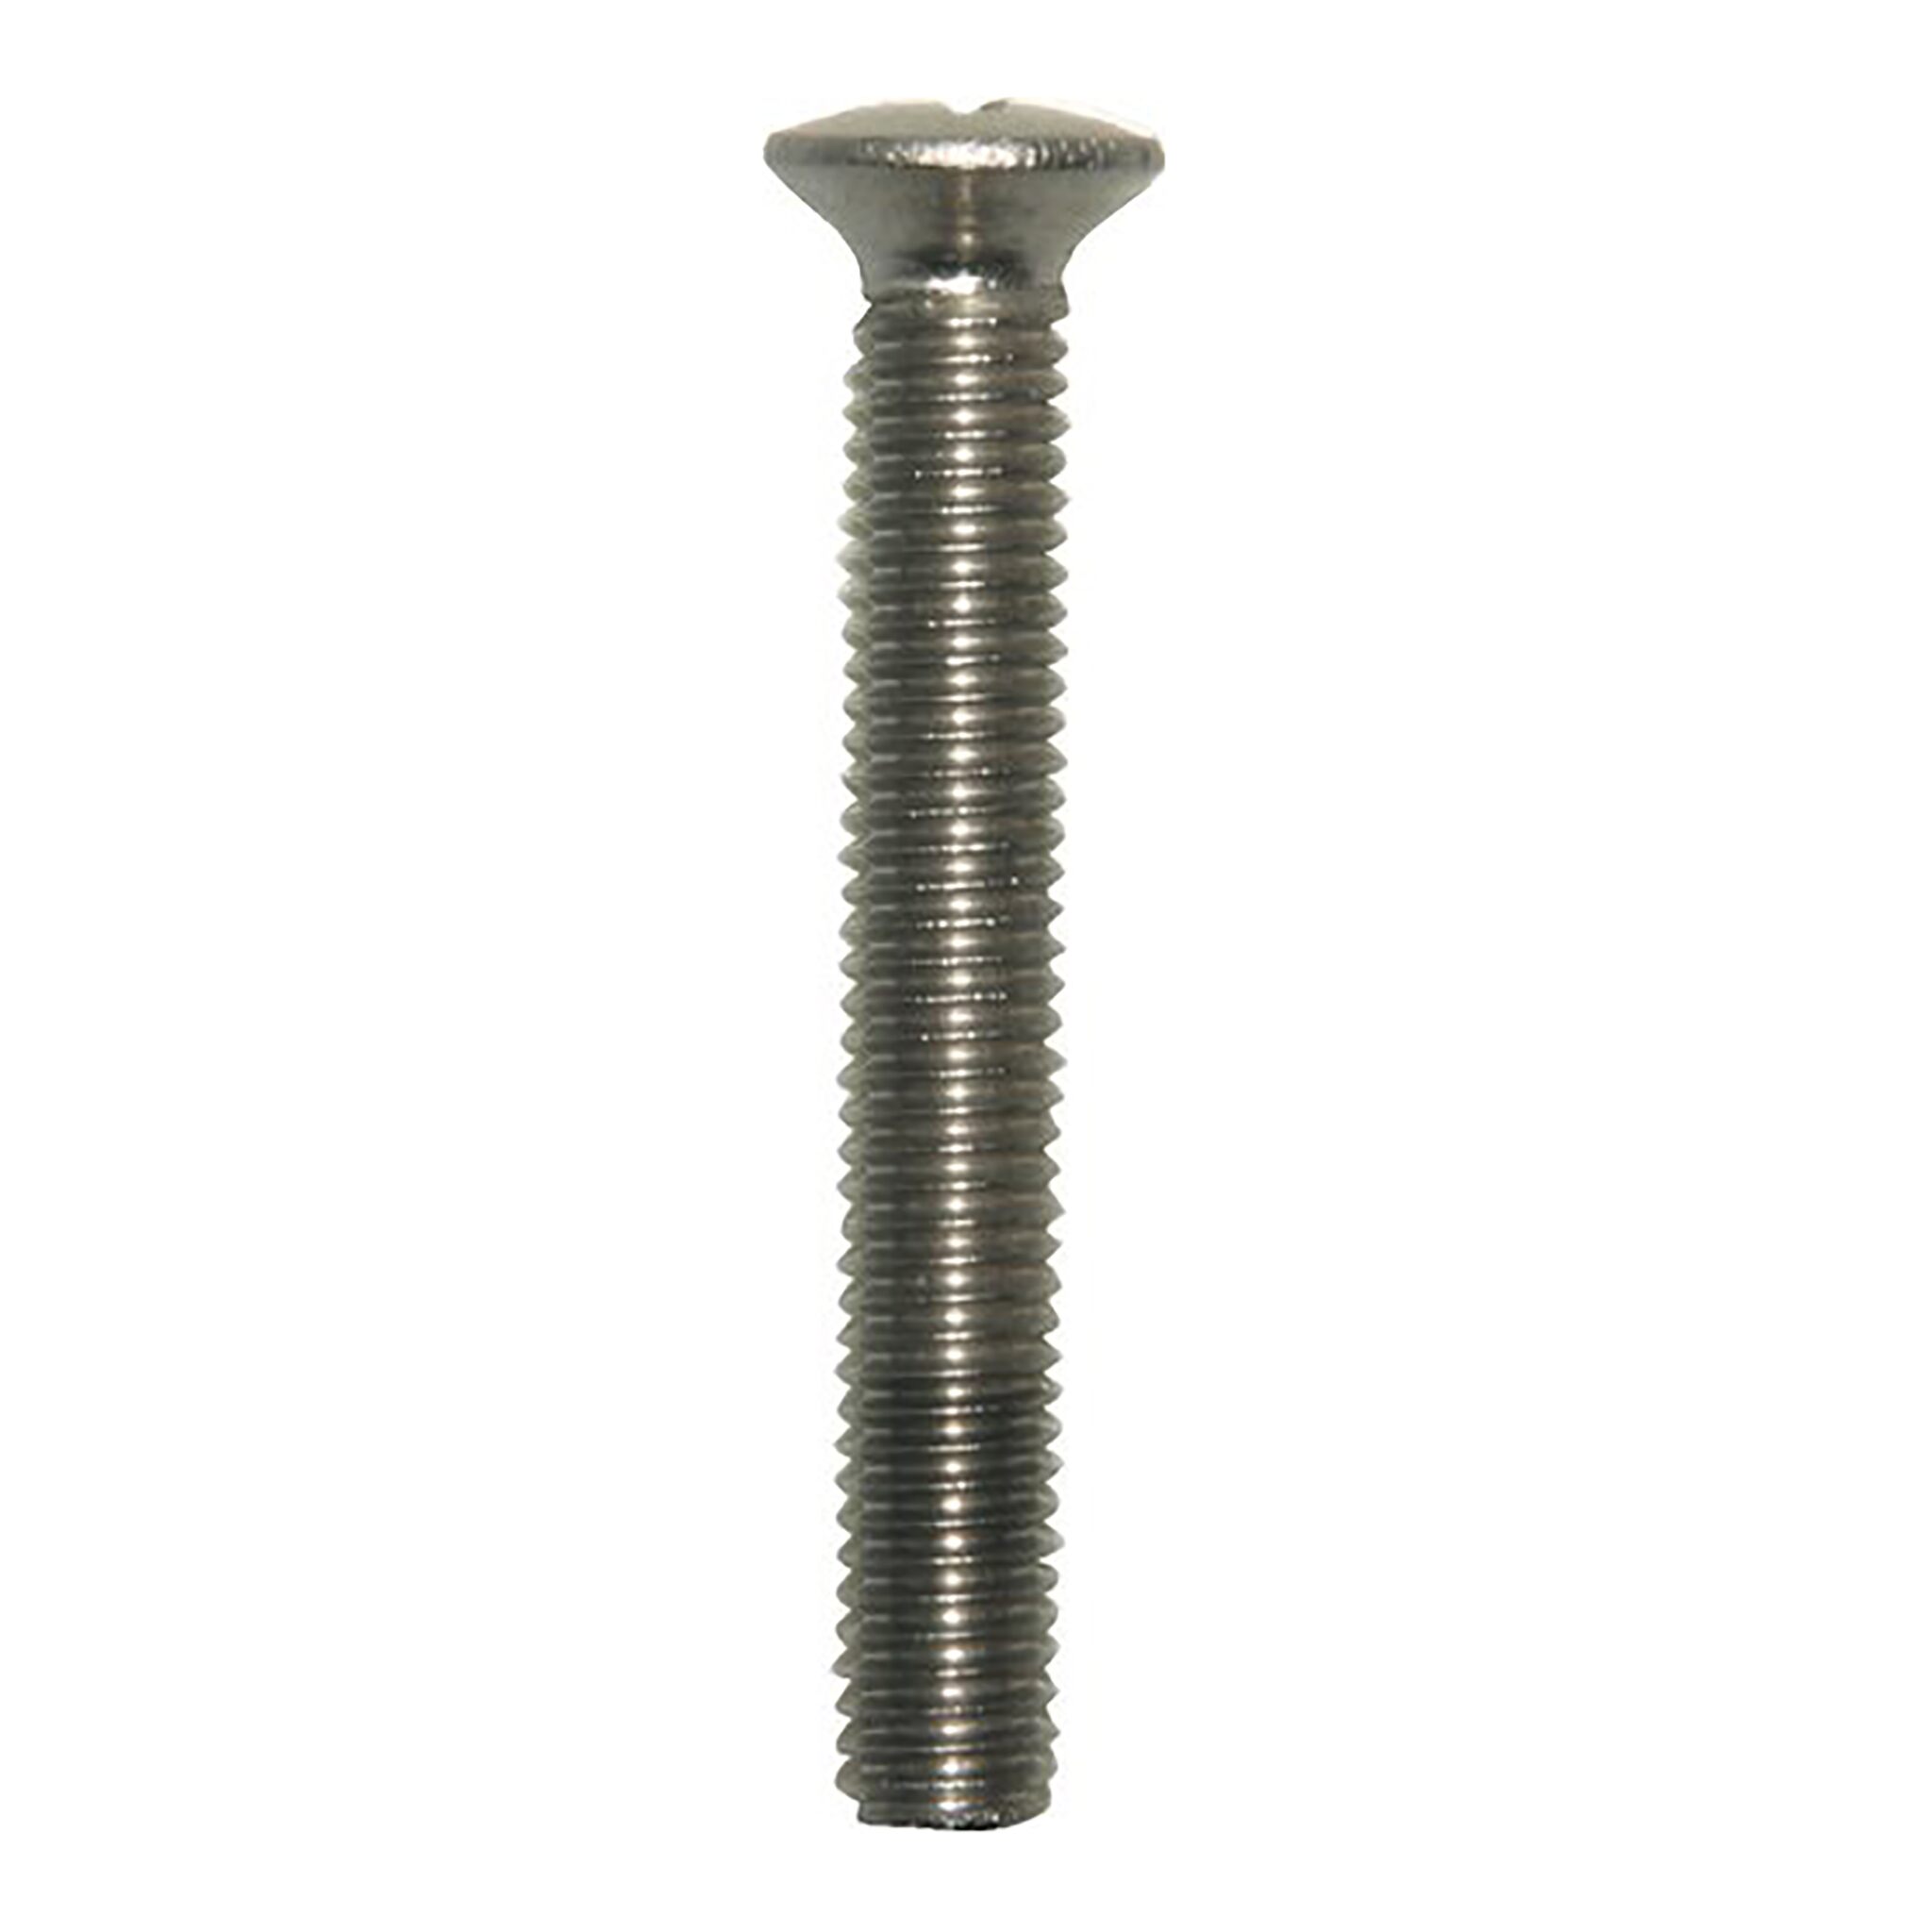 Marinetech pan head screw with nut (DIN 966/934-A4)